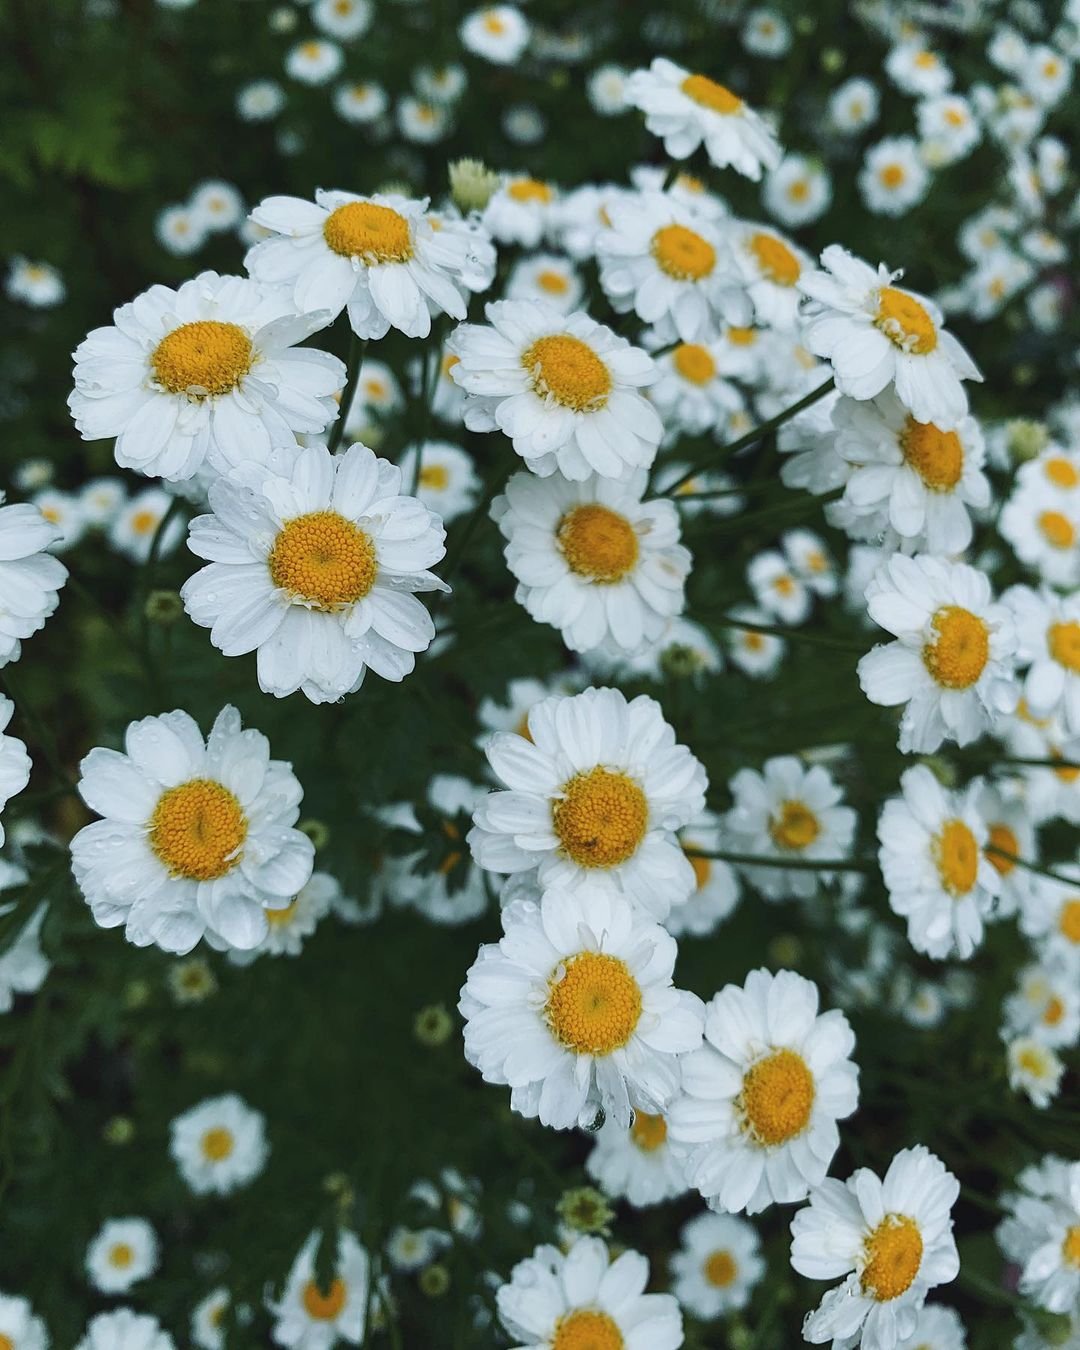  White daisies with yellow centers, known as Feverfew flowers, blooming in a garden.